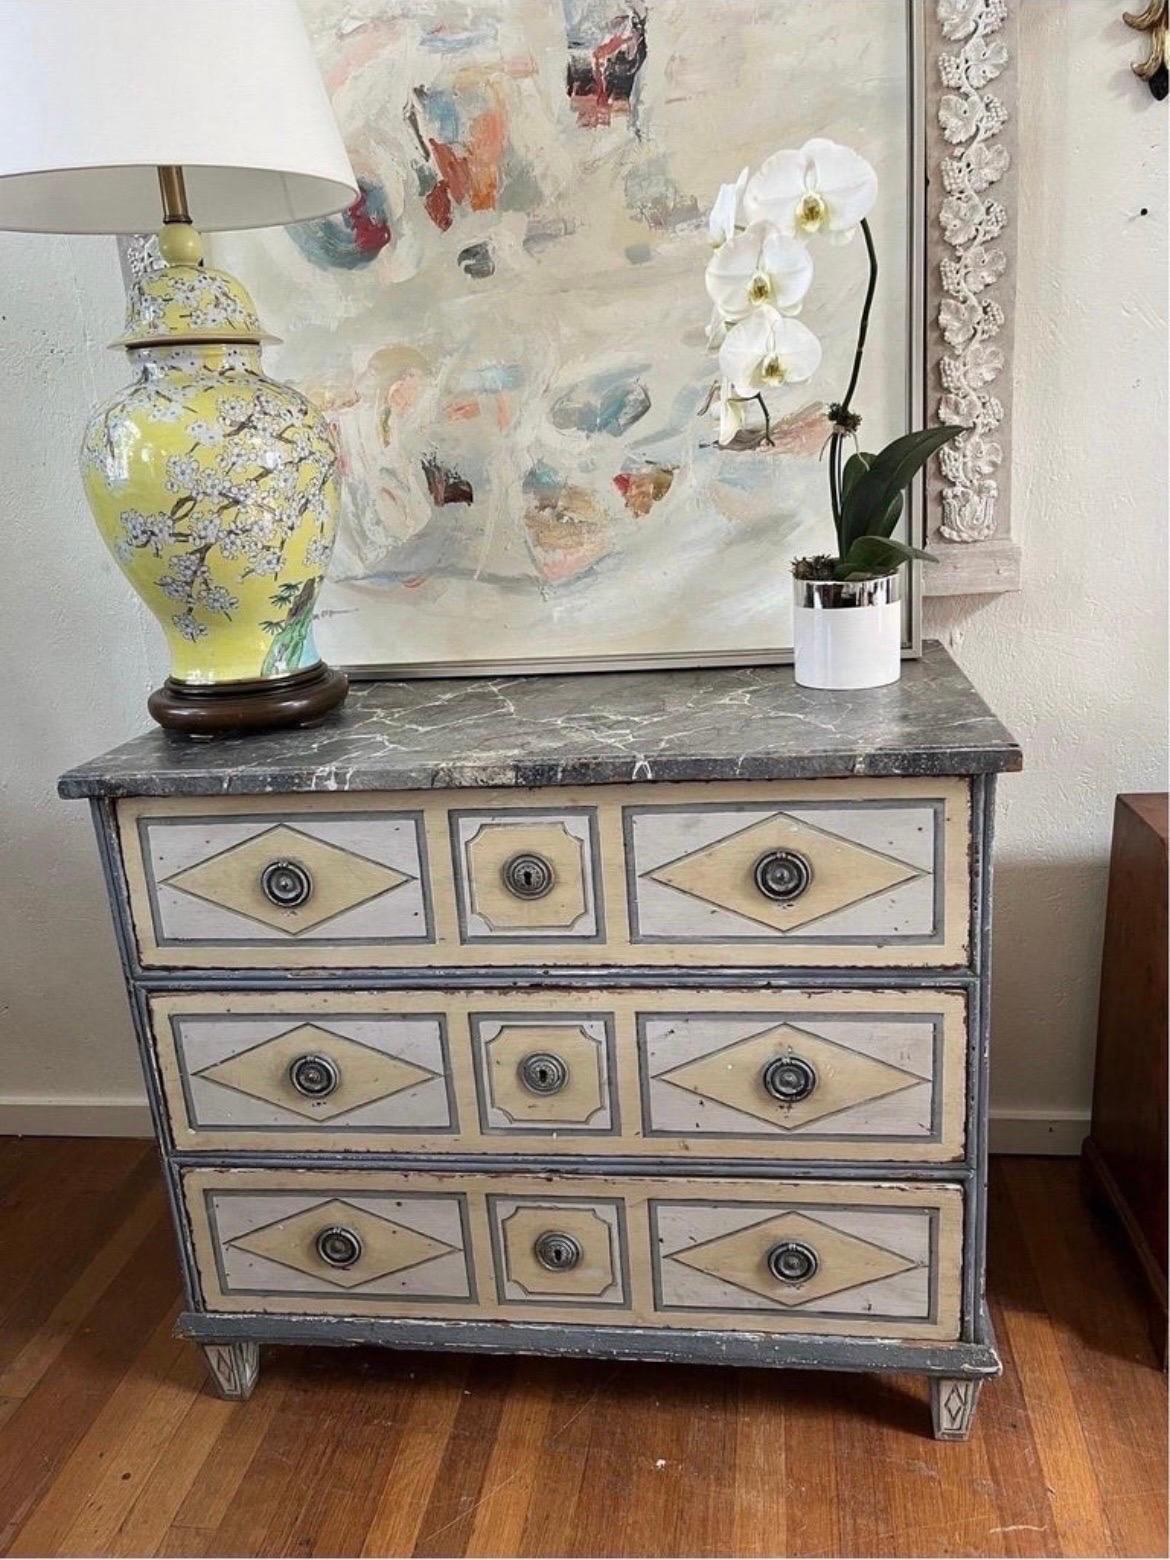 French, late 18th century.

A French late 18th century three drawer chest or commode having geometric painted panels to the drawers and sides. Each drawer has two ring pulls and a central key hole. The top has a faux marbleized finish and verso with